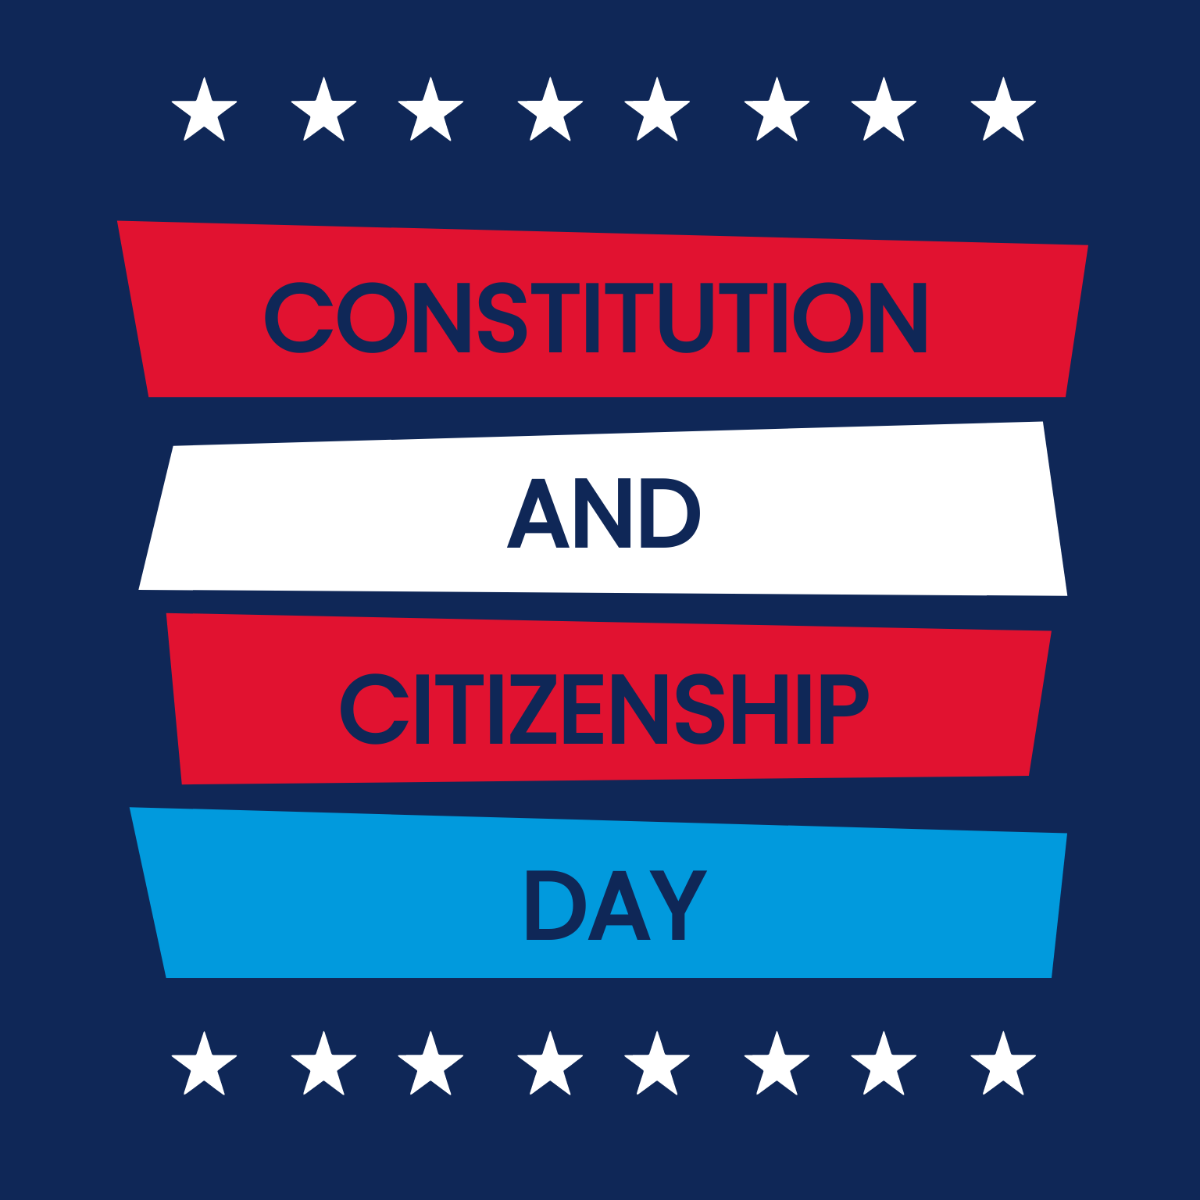 Free Constitution and Citizenship Day Promotion Vector Template